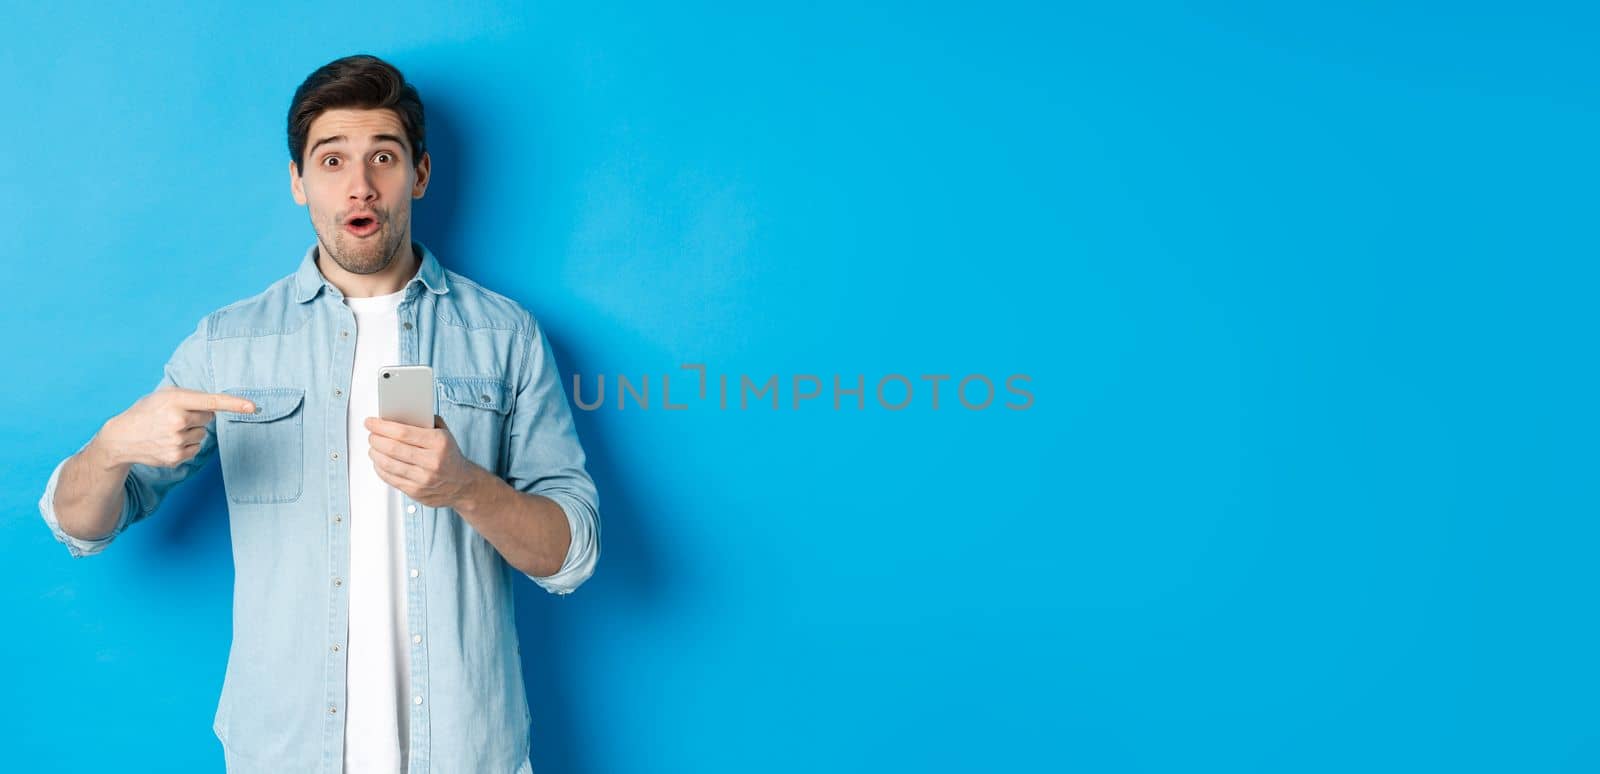 Concept of online shopping, applications and technology. Impressed man pointing finger at mobile phone and looking amazed, recommending app, standing over blue background.